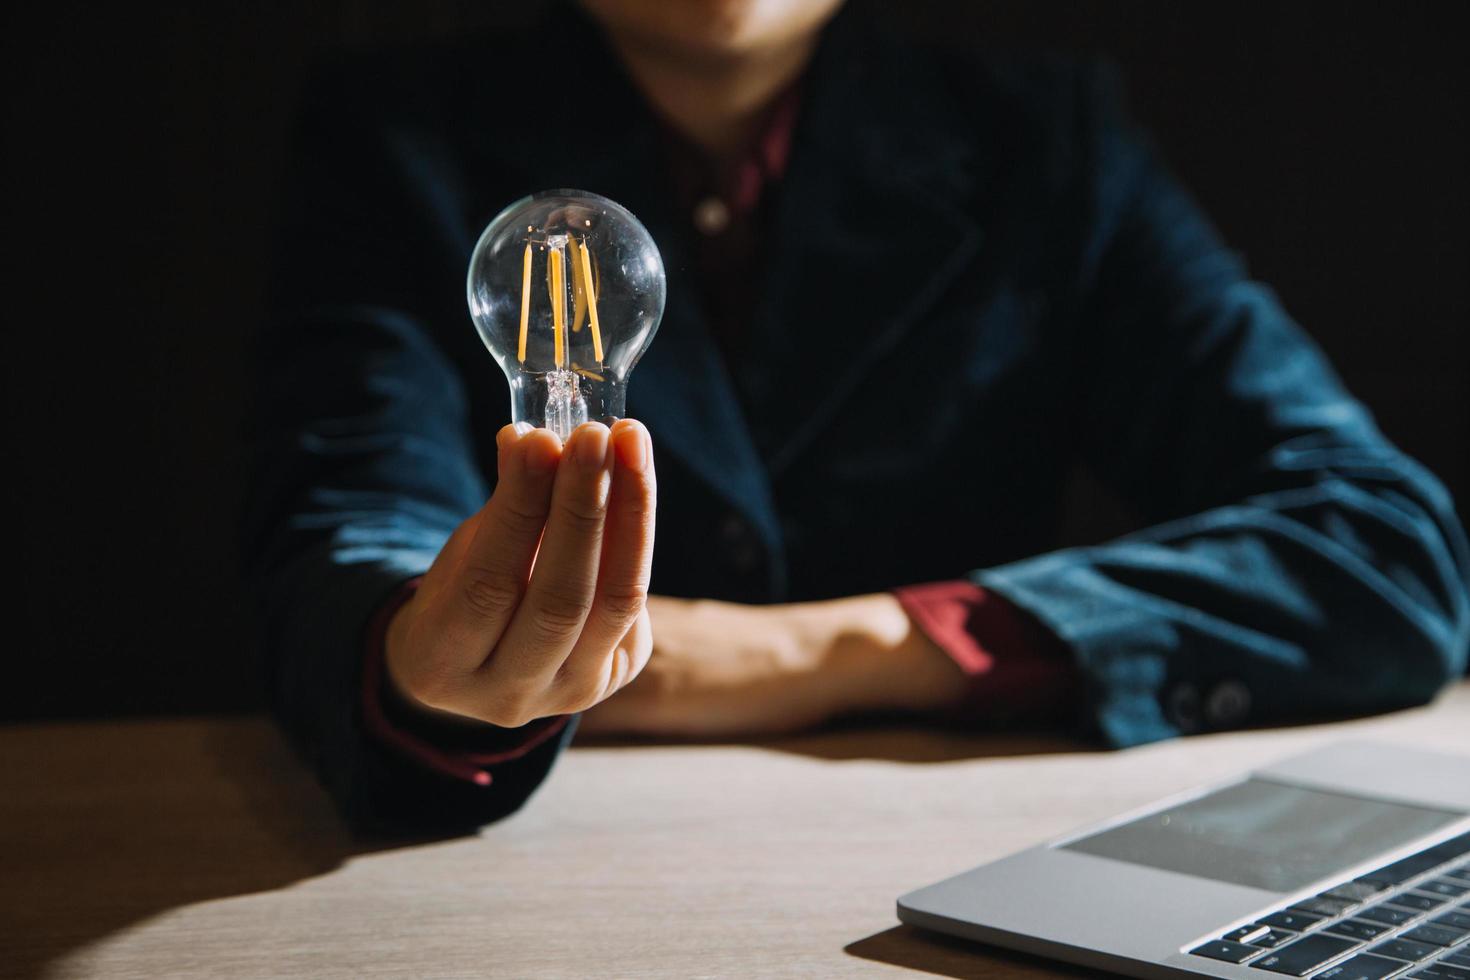 Innovation. Hands holding light bulb for Concept new idea concept with innovation and inspiration, innovative technology in science and communication concept, photo